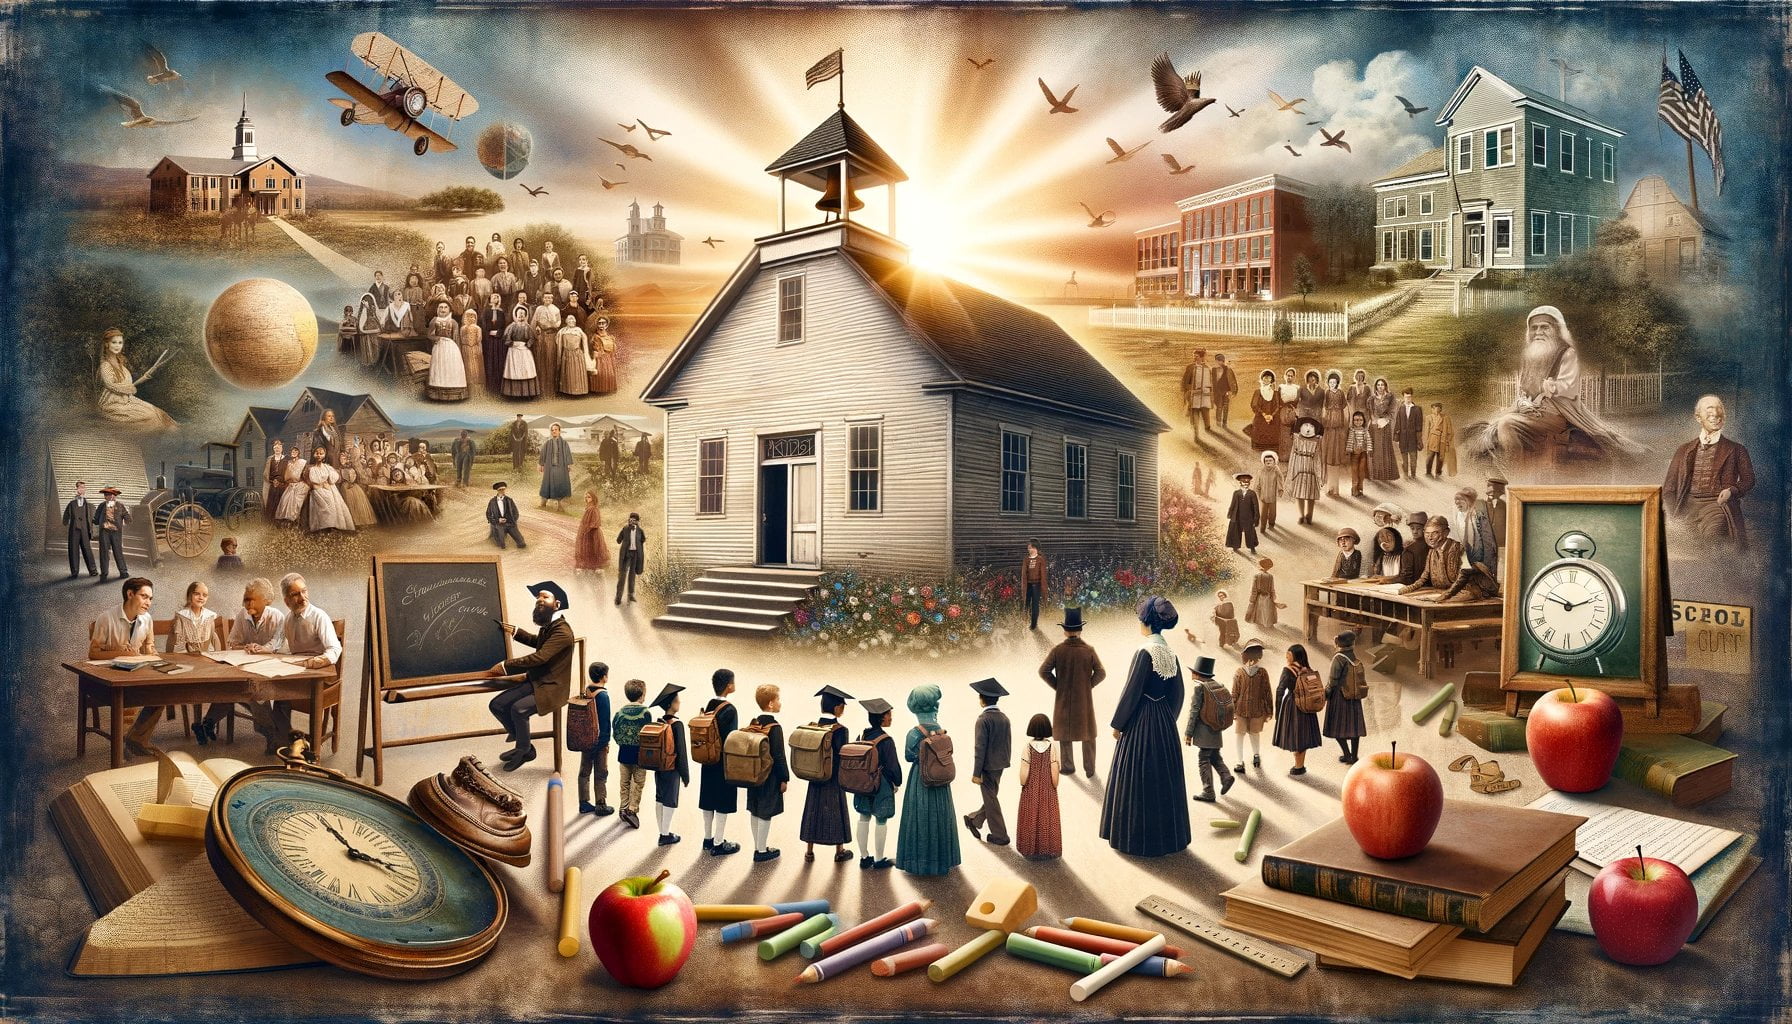 11 facts about the history of education in america